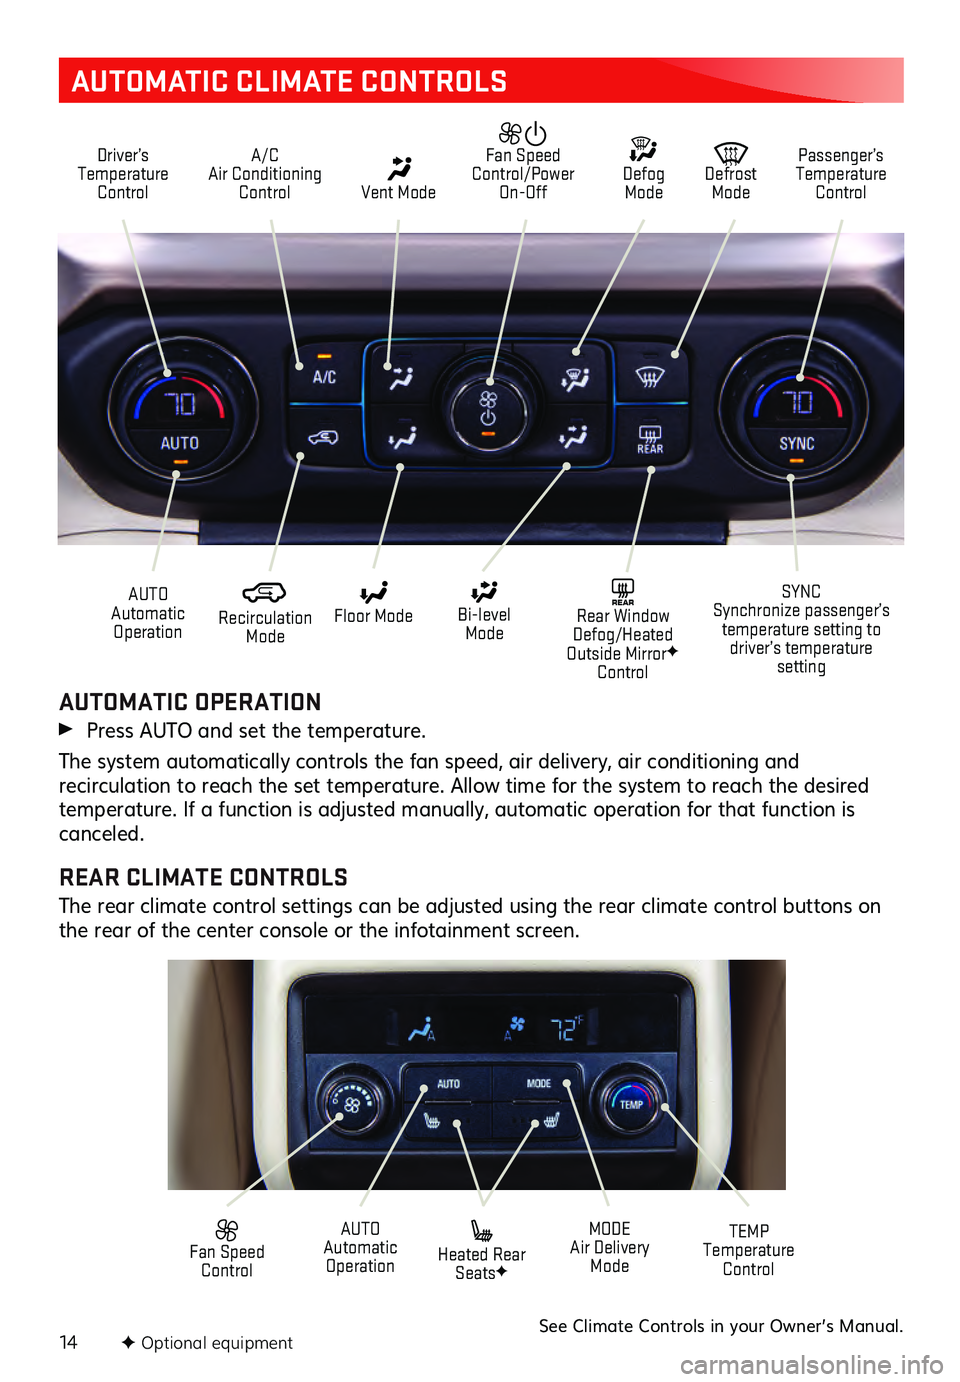 GMC ACADIA 2021  Get To Know Guide 14
AUTOMATIC CLIMATE CONTROLS
Driver’s Temperature Control A/C 
Air Conditioning  Control Vent Mode
  
Defrost  Mode Defog Mode Passenger’s 
Temperature  Control
  
Fan Speed 
Control/Power  On-Of